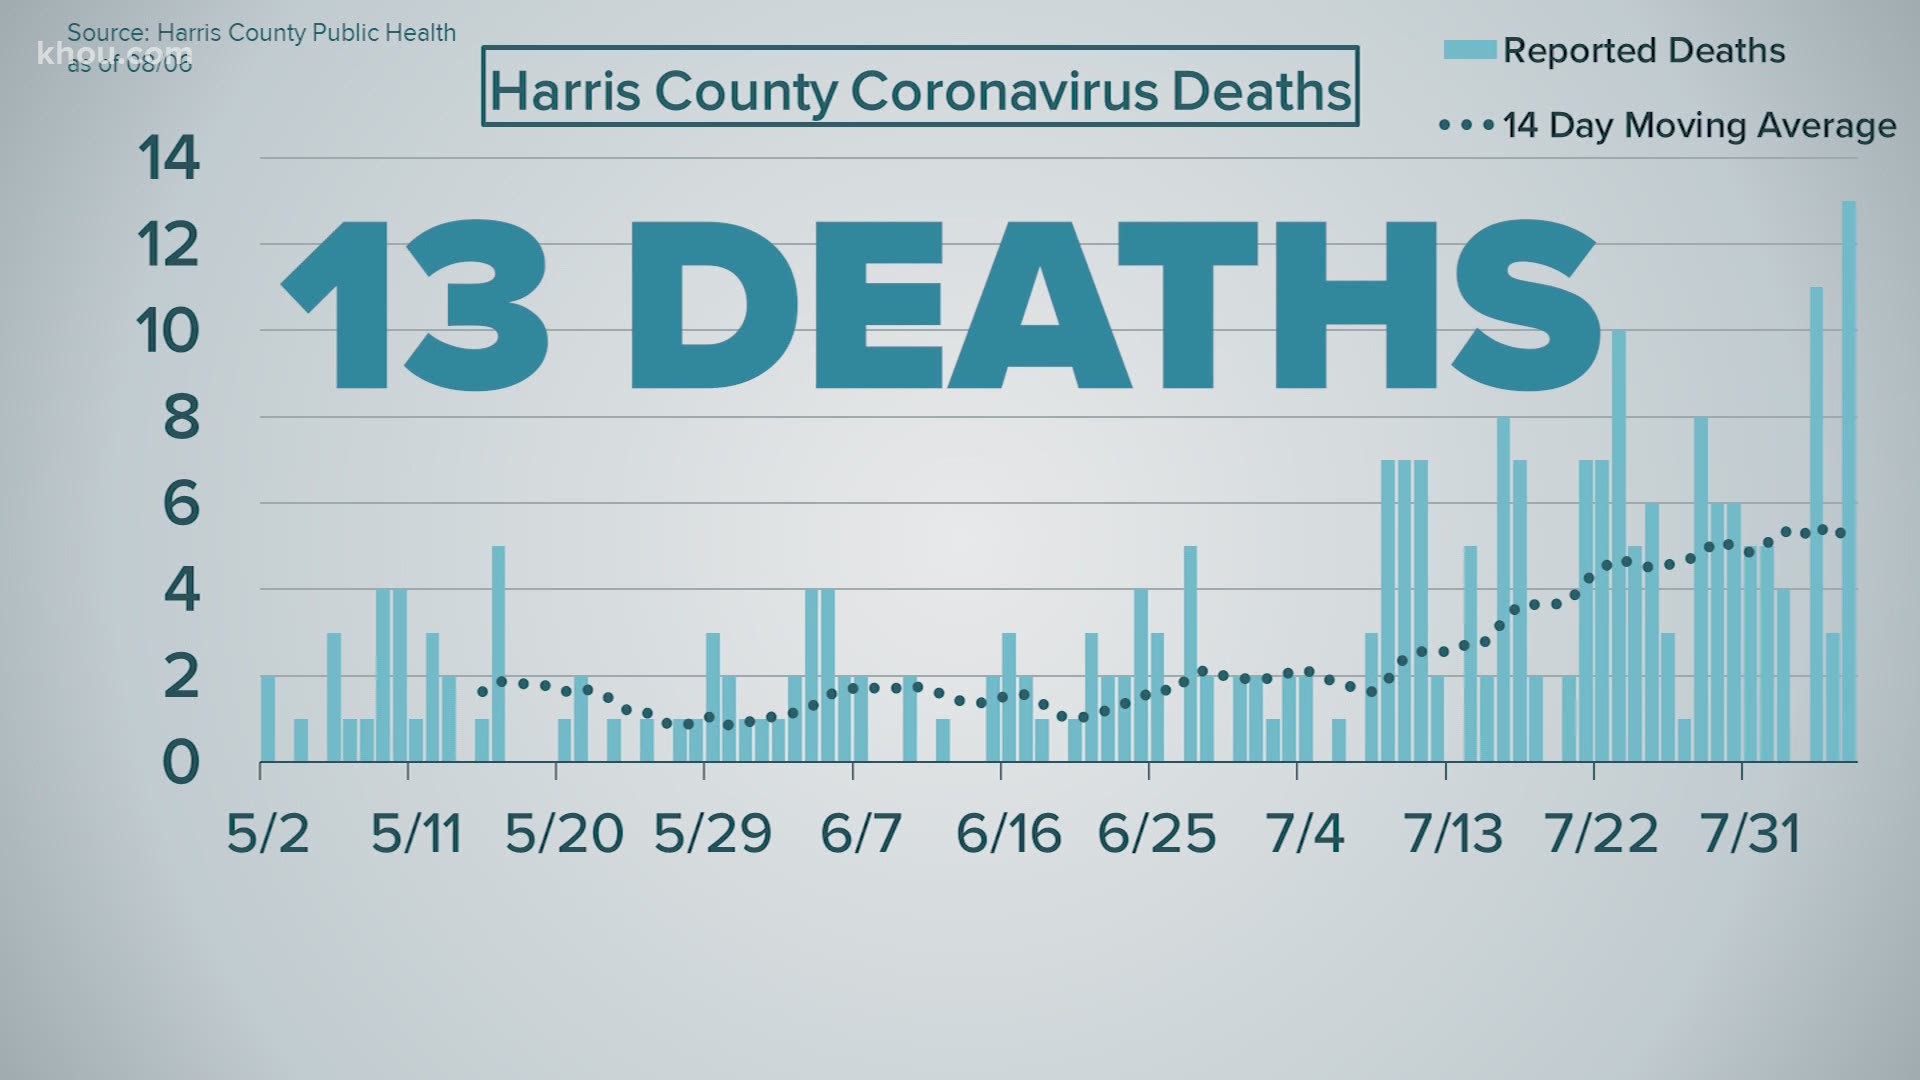 The Texas Department of State Health Services announced 306 new COVID-19 deaths and 7,598 new cases on Thursday